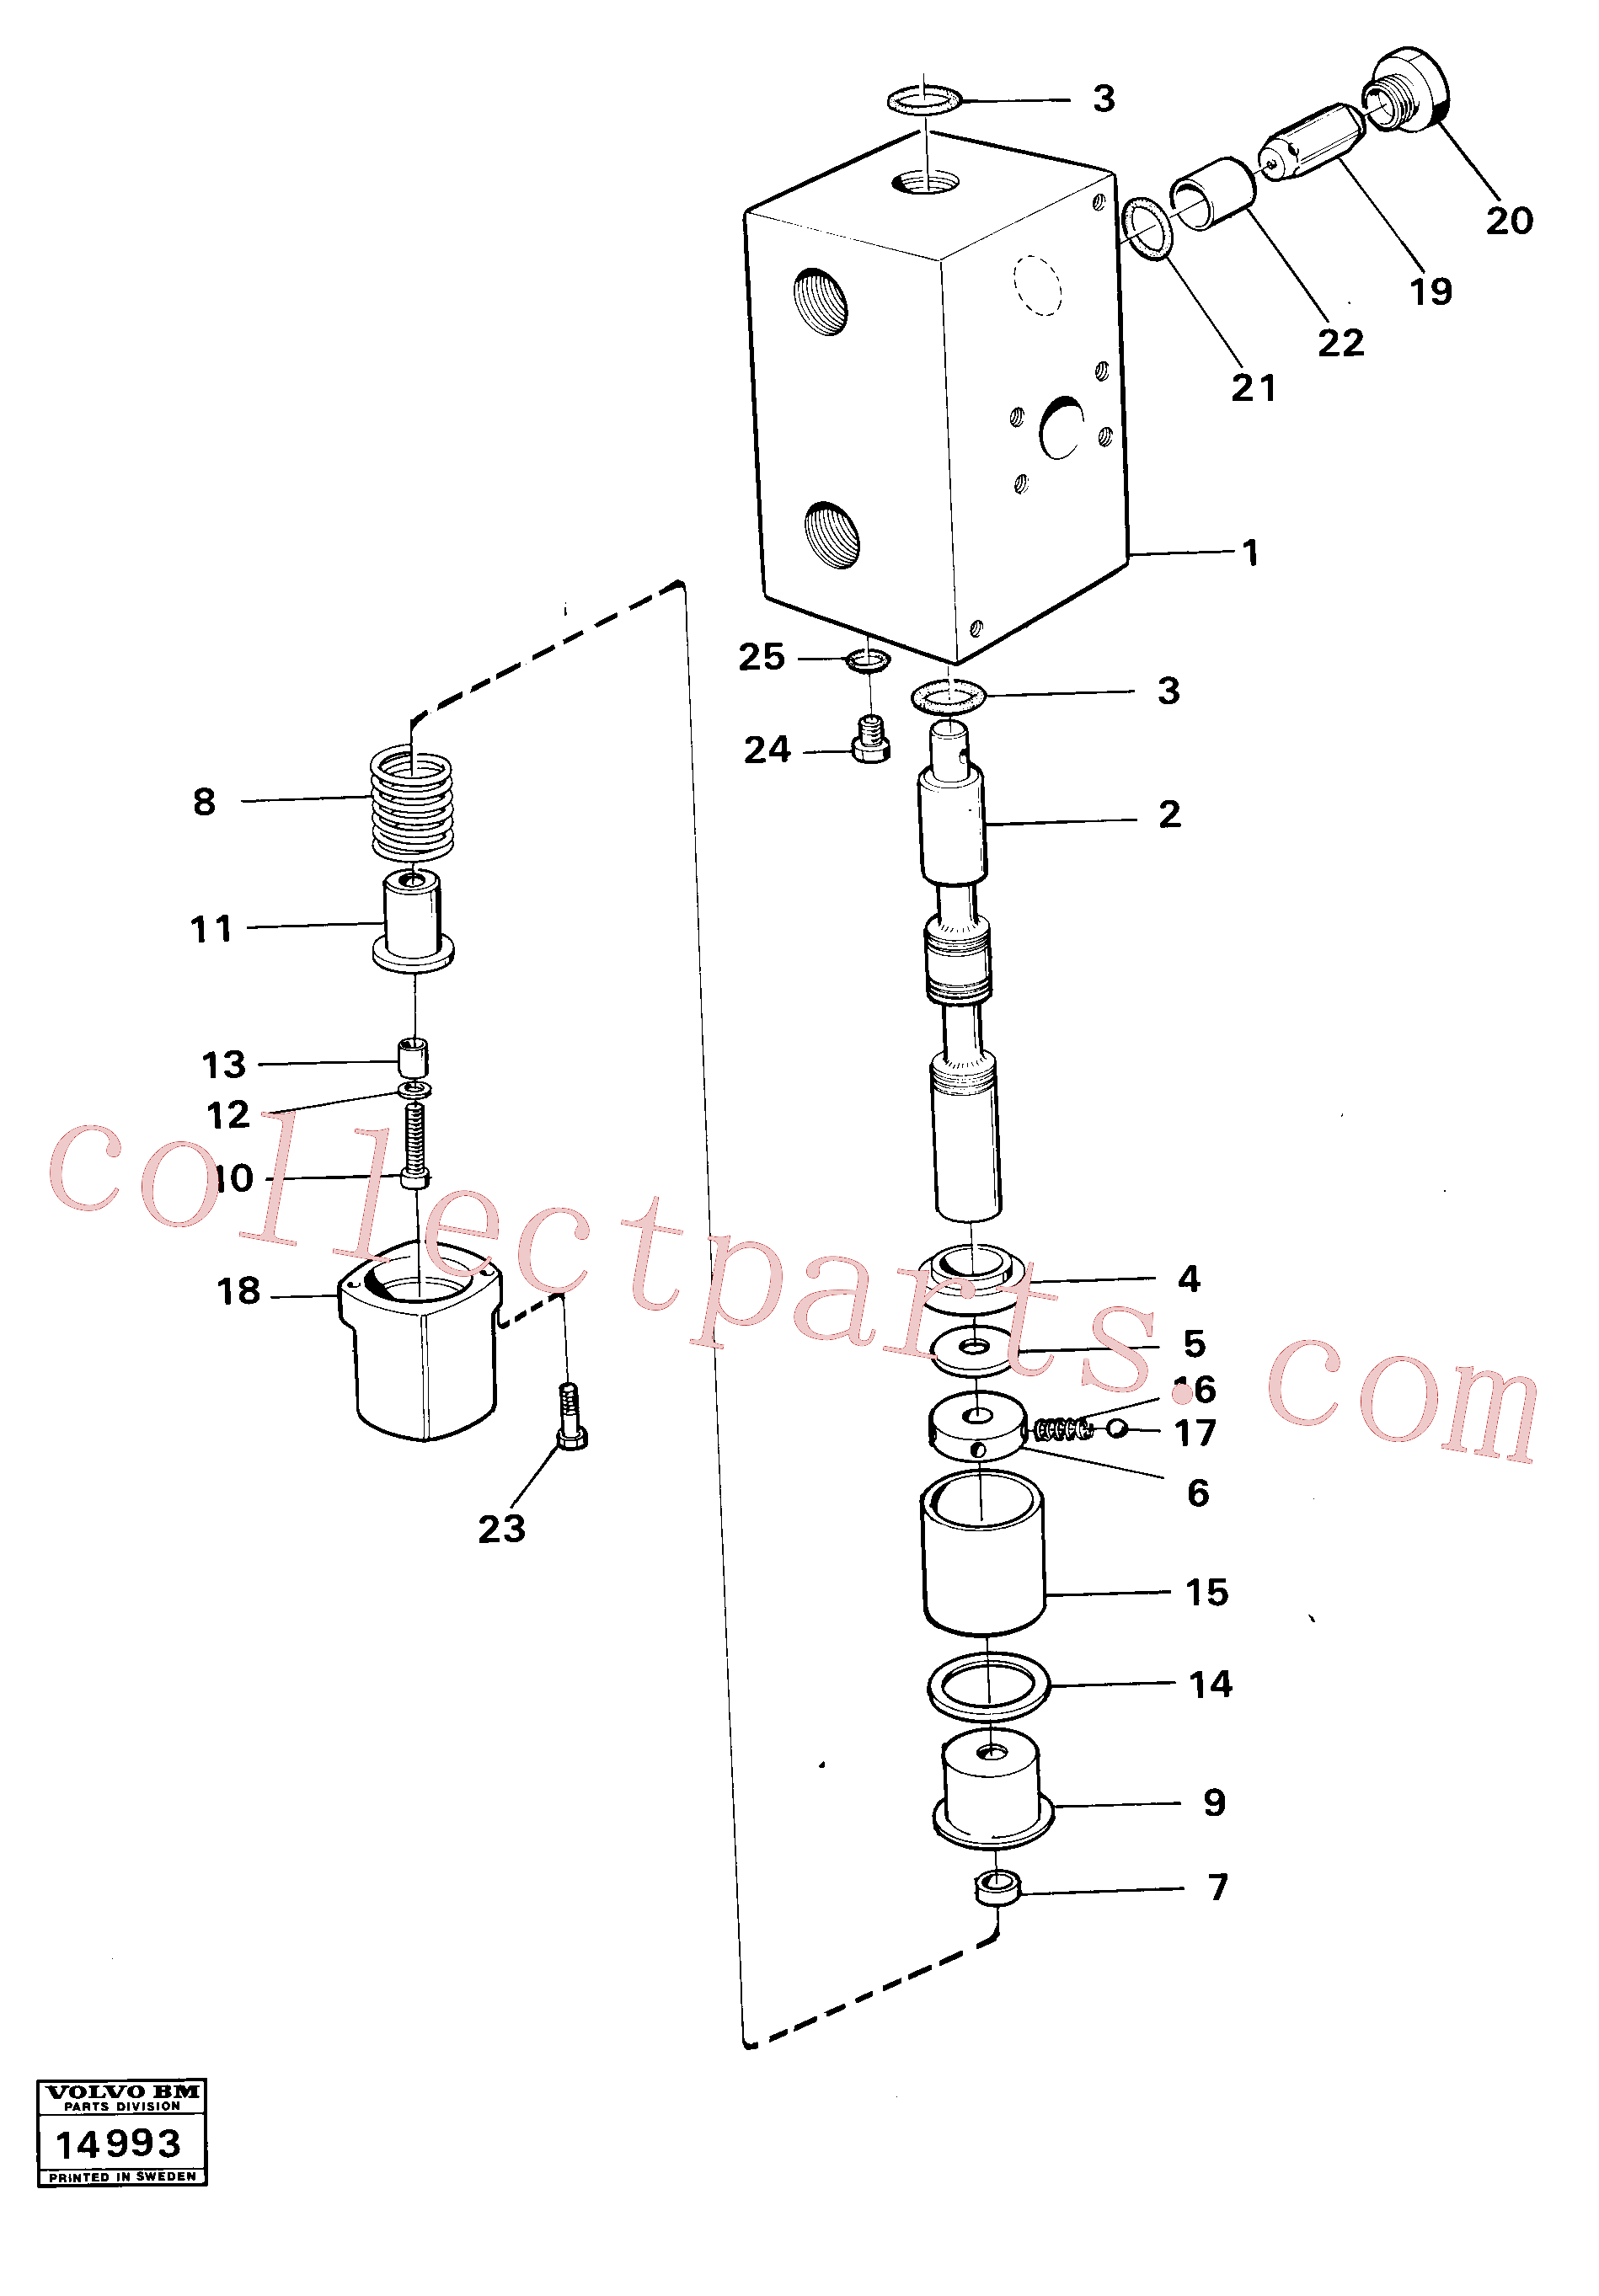 VOE942981 for Volvo Control valve(14993 assembly)